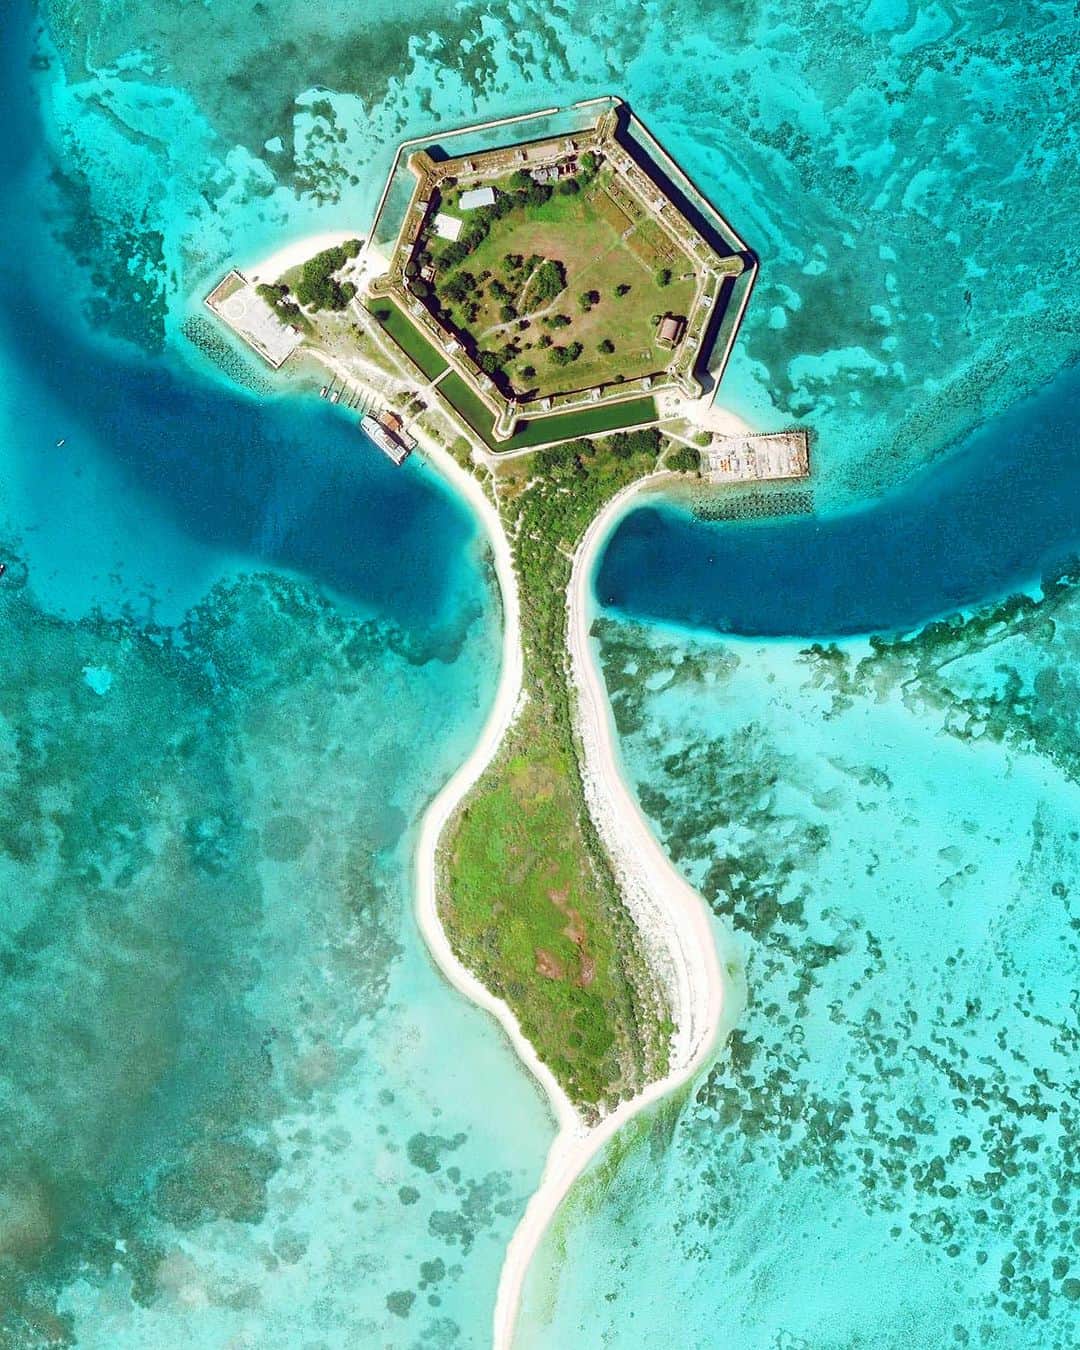 Daily Overviewのインスタグラム：「Fort Jefferson is a former U.S. military coastal fortress located in the lower Florida Keys. It is the largest brick masonry structure in the Western Hemisphere, made with more than 16 million bricks. Fort Jefferson is on Garden Key, the second-largest island in Dry Tortugas National Park.  Created by @dailyoverview Source imagery: @nearmap」